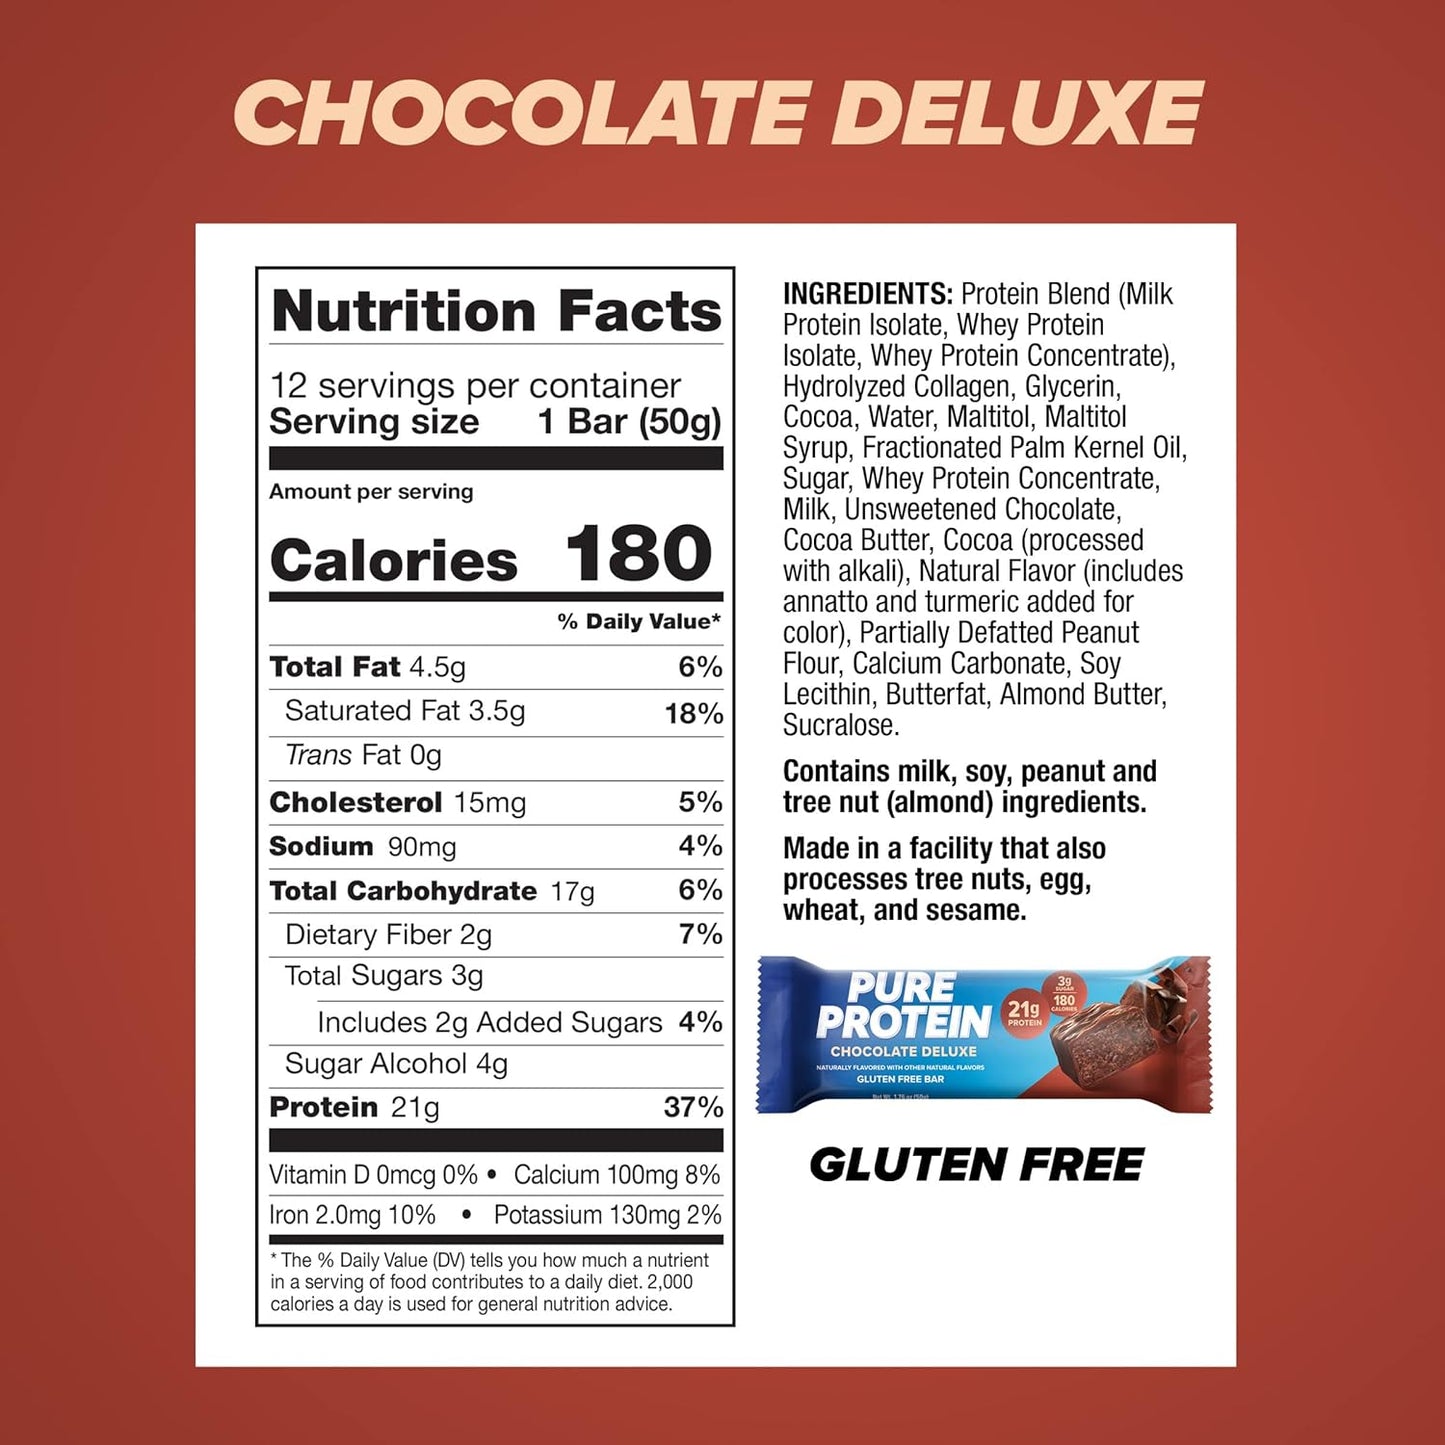 Pure Protein Bars, High Protein, Nutritious Snacks to Support Energy, Low Sugar, Gluten Free, Chocolate Deluxe, 1.76 oz., 12 Count(Pack of 1) (Packaging may vary)